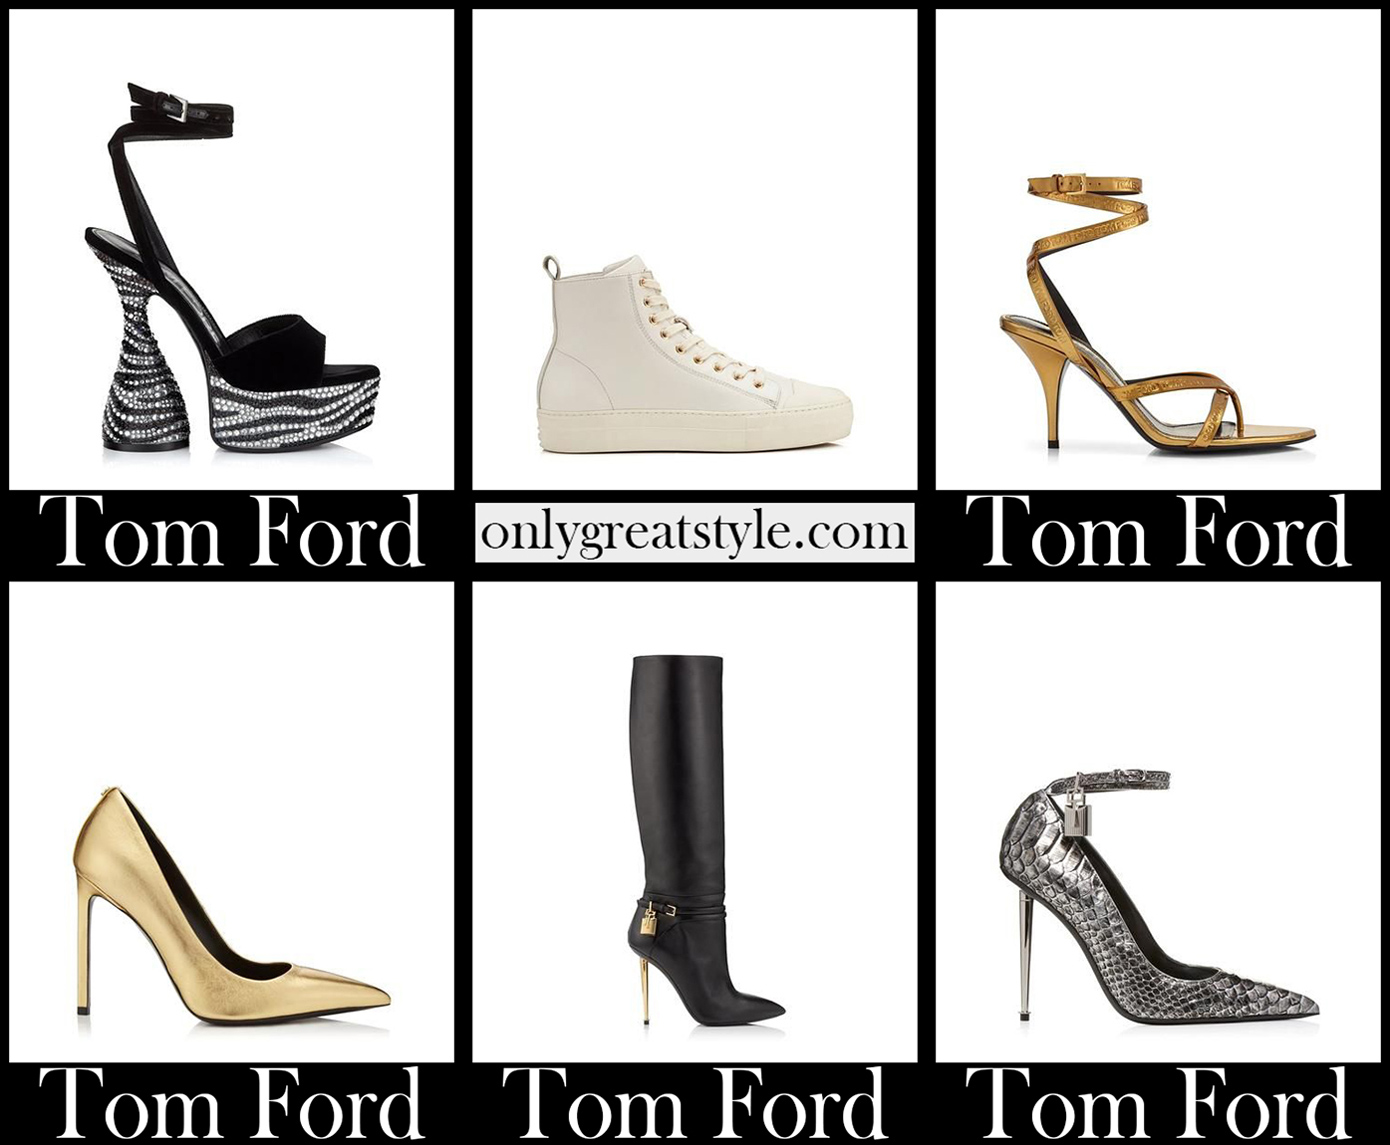 Tom Ford shoes 2021 new arrivals womens footwear